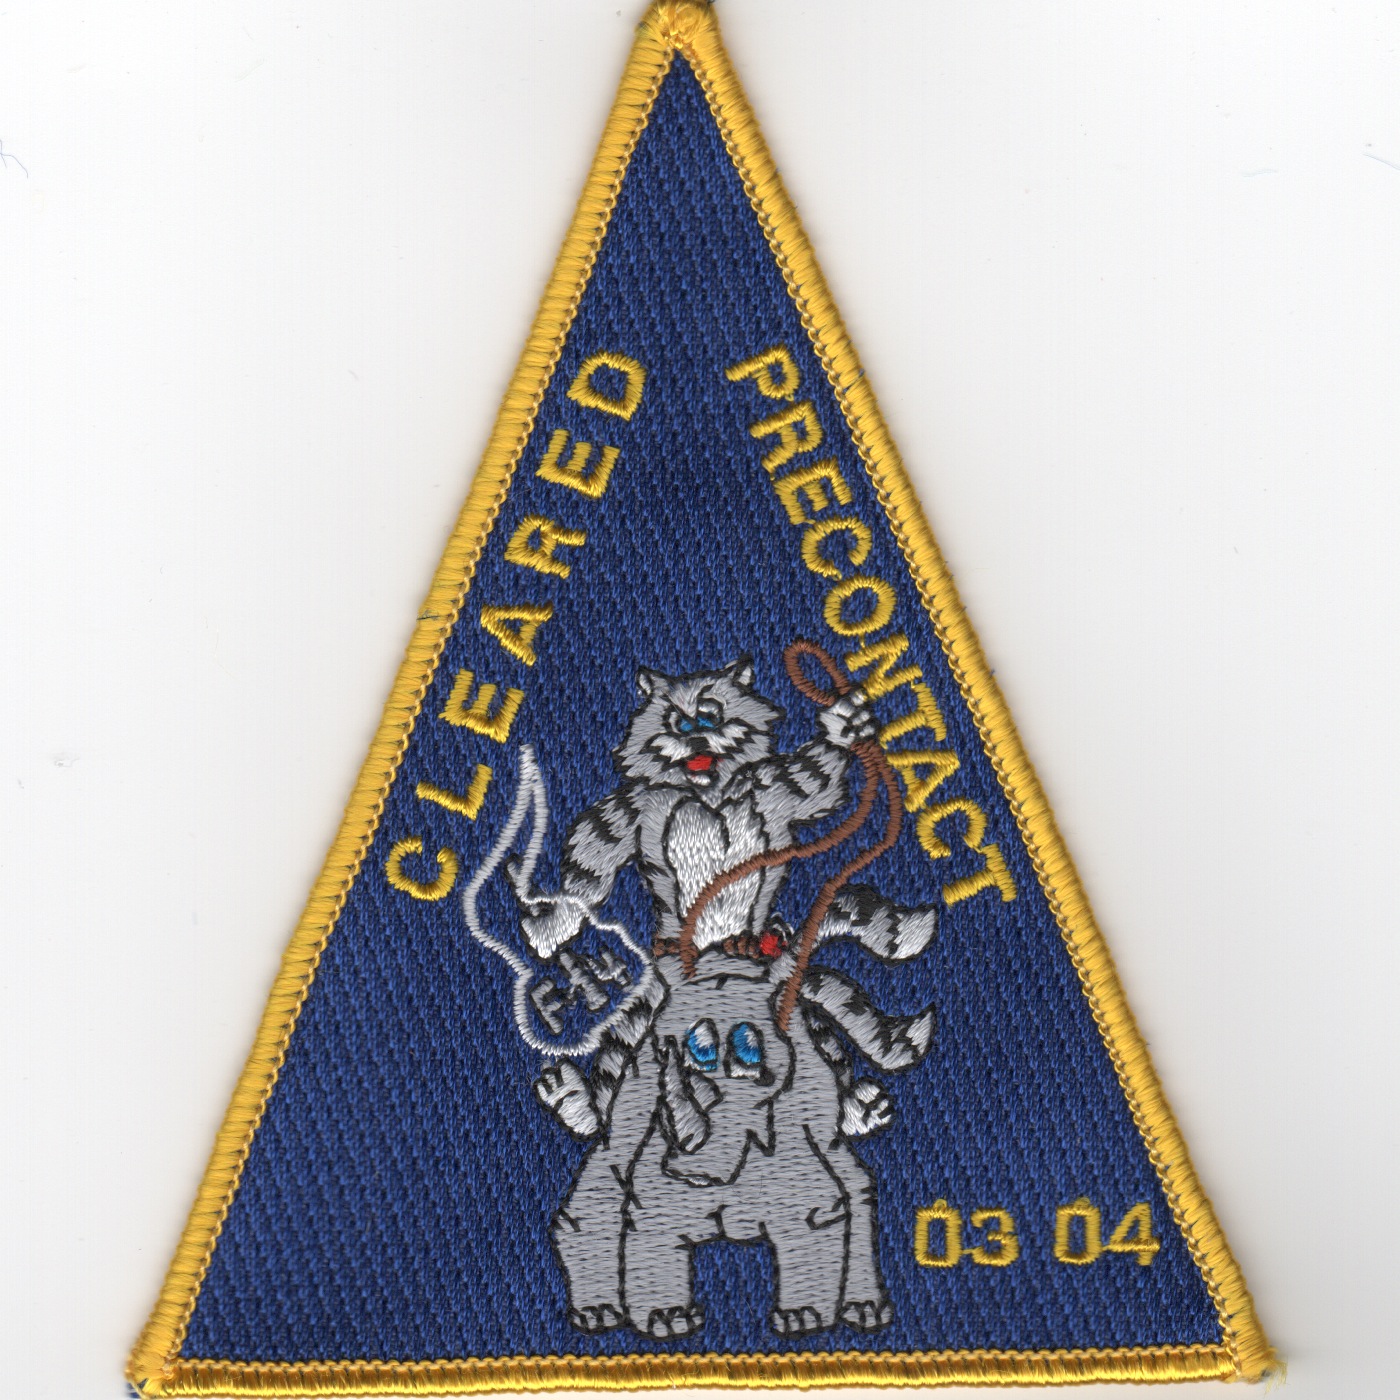 VF-101 Class 03-04 Patch (Official)